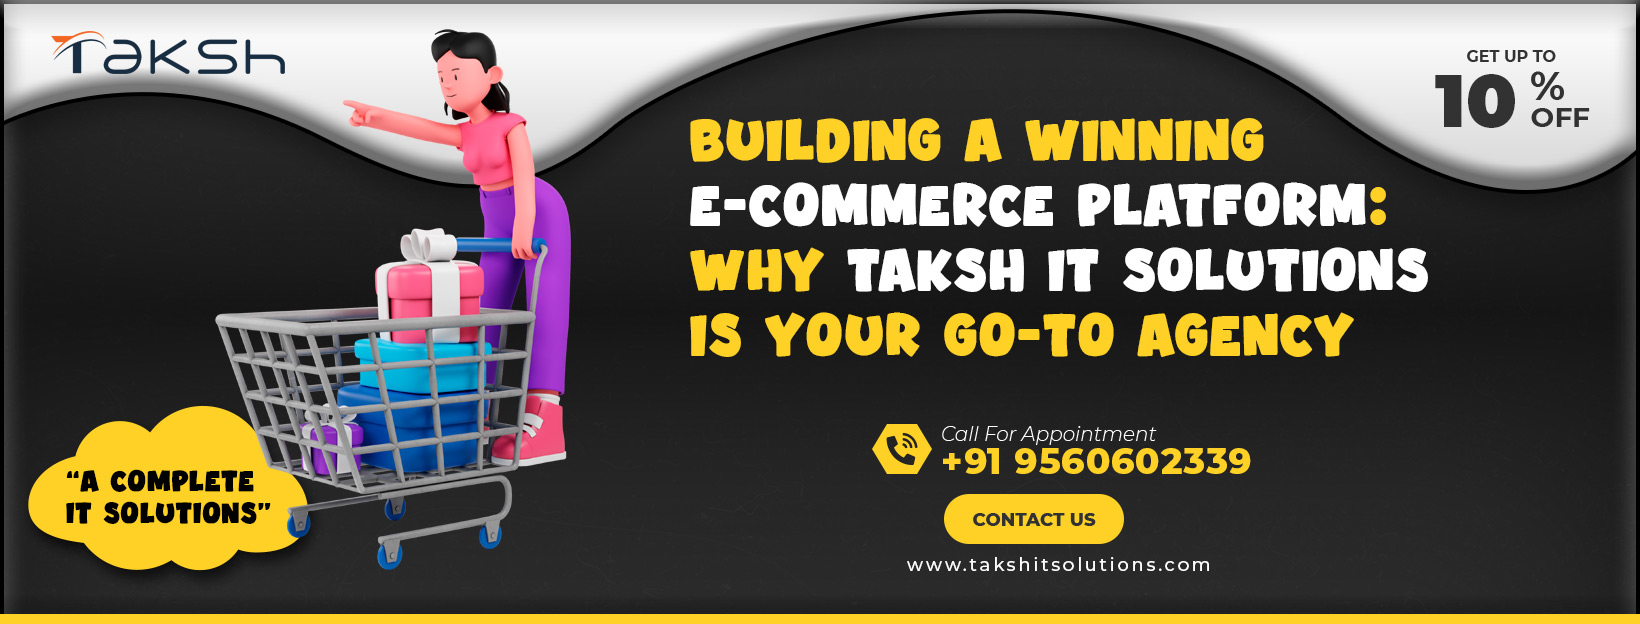 Building a Winning E-commerce Platform: Why Taksh IT Solutions is Your Go-To Agency